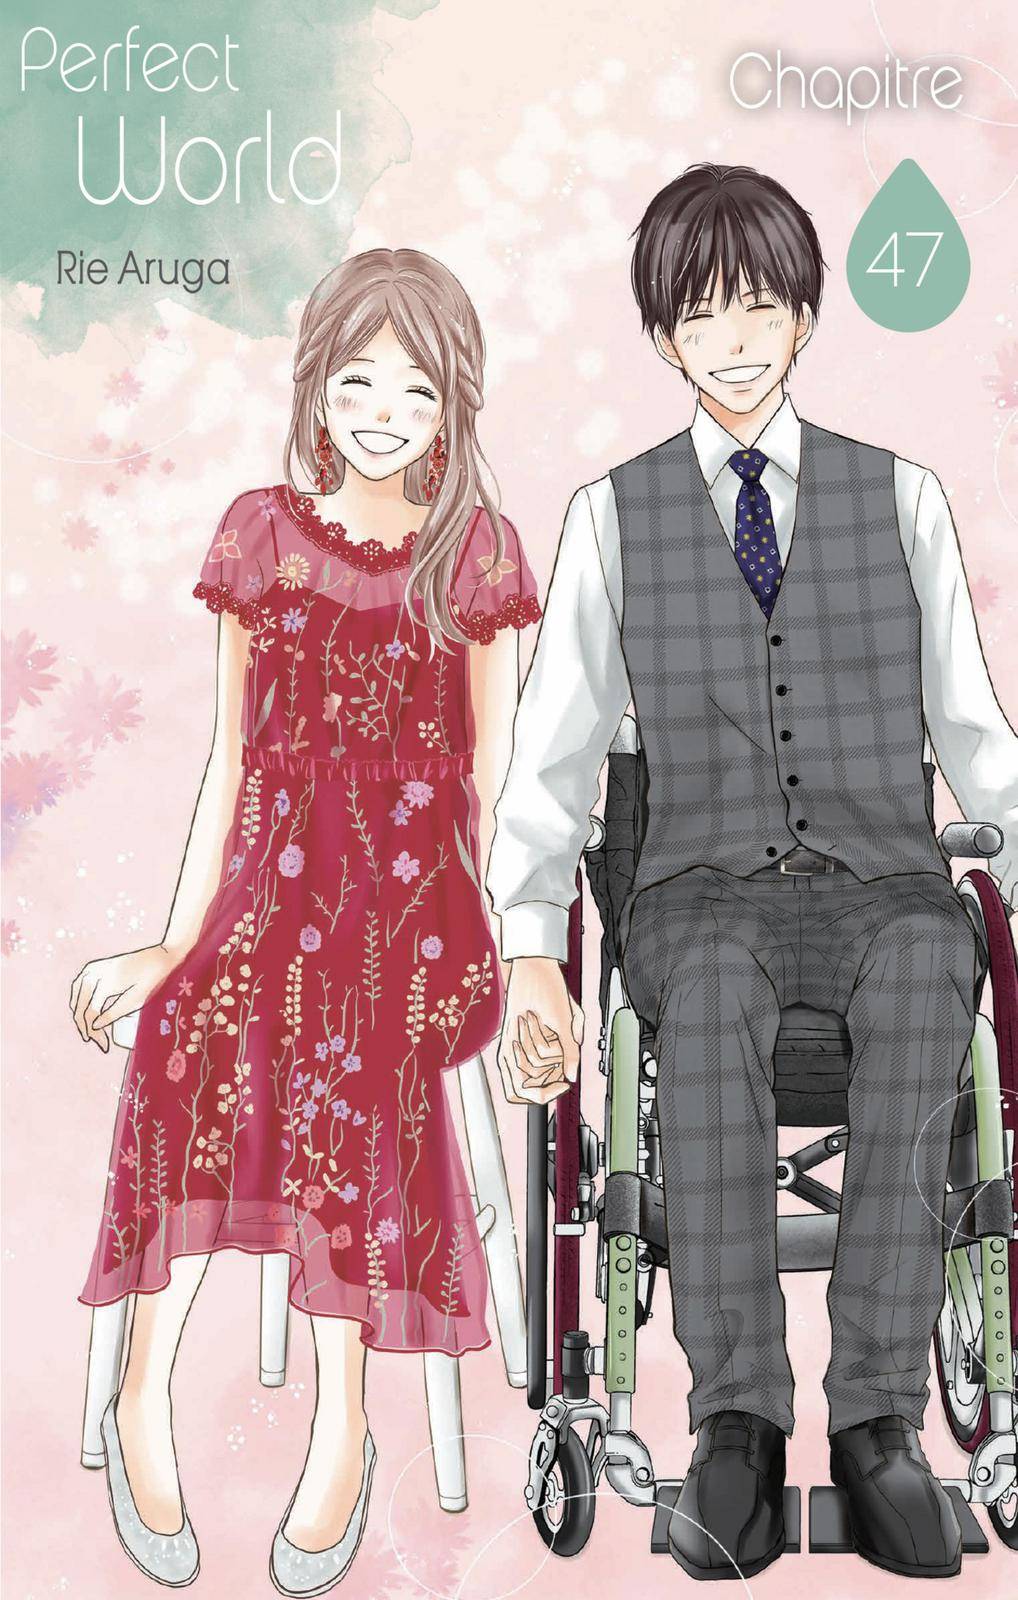 Perfect World (ARUGA Rie) - chapter 47 - #1